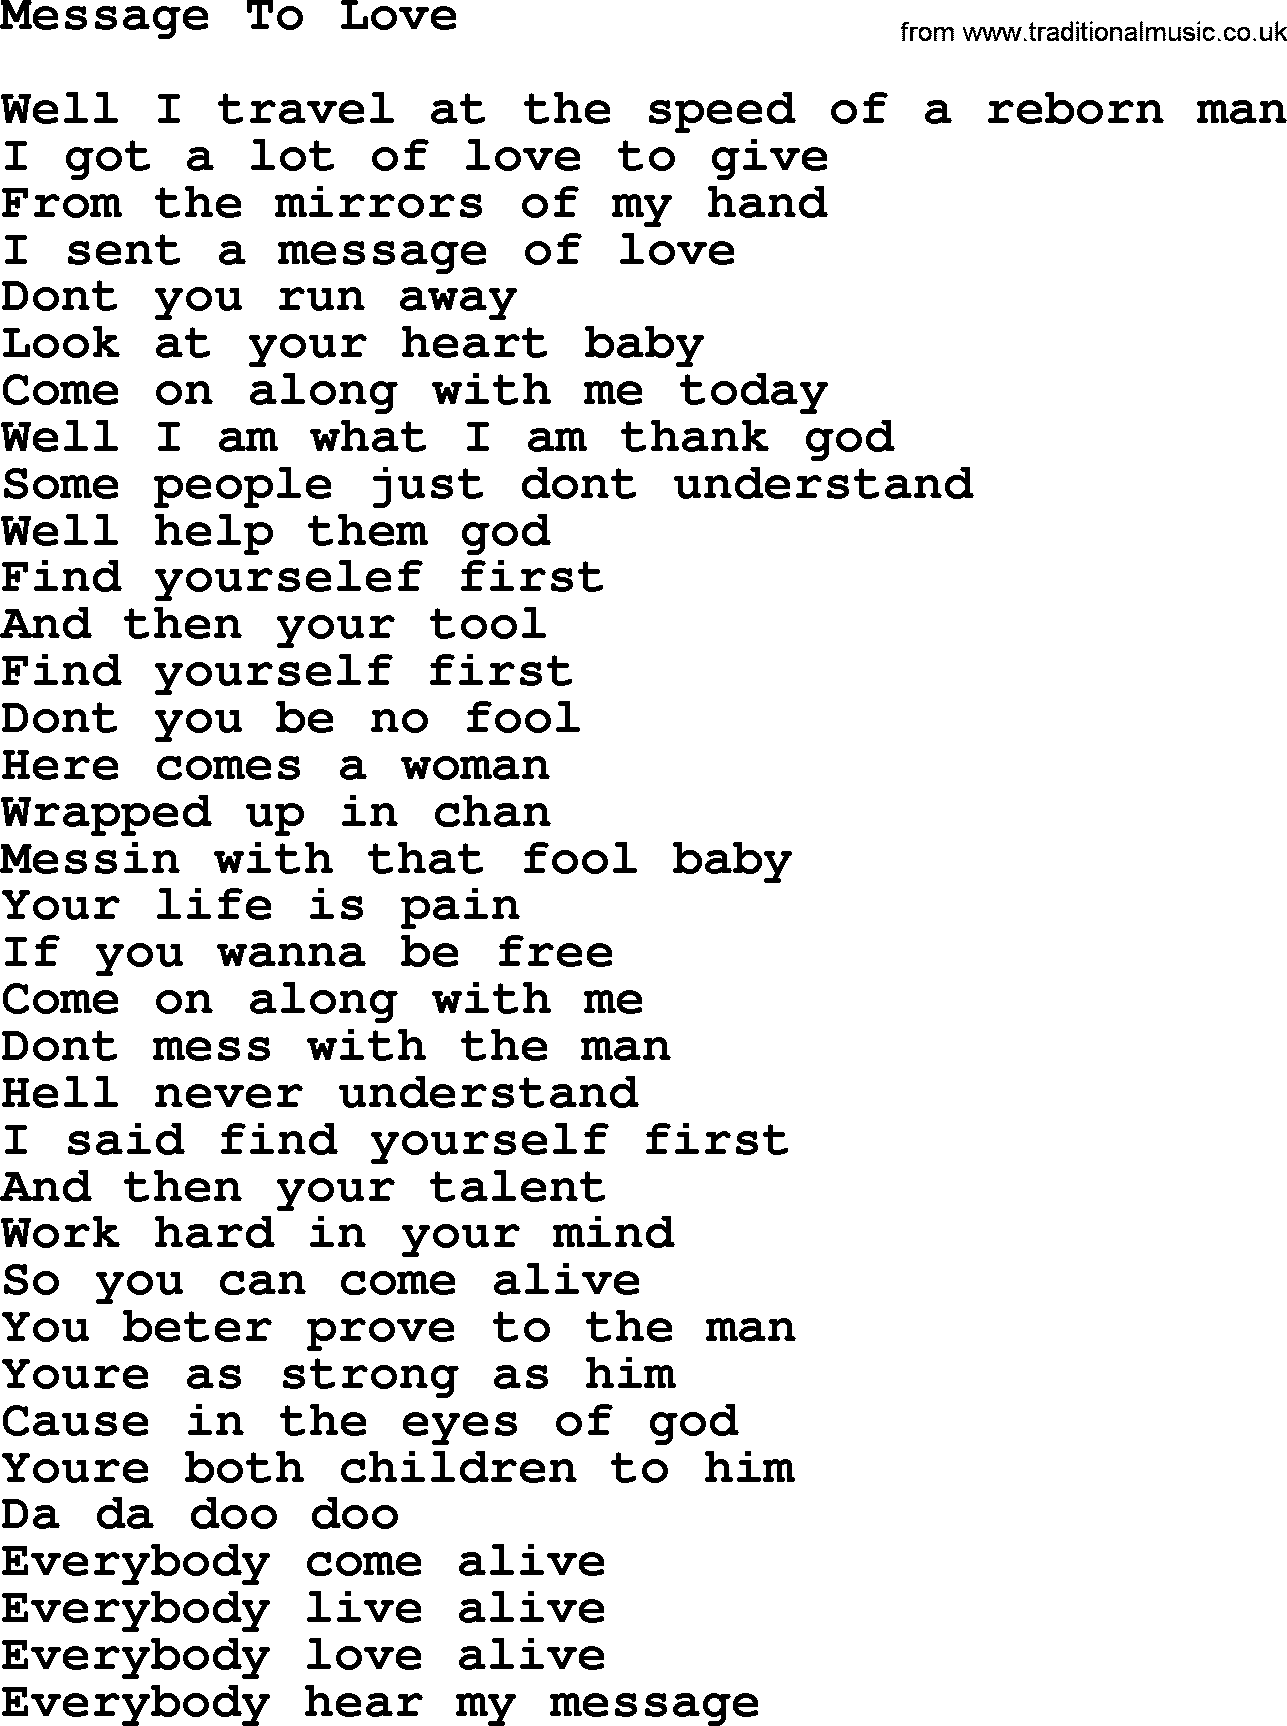 The Byrds song Message To Love, lyrics